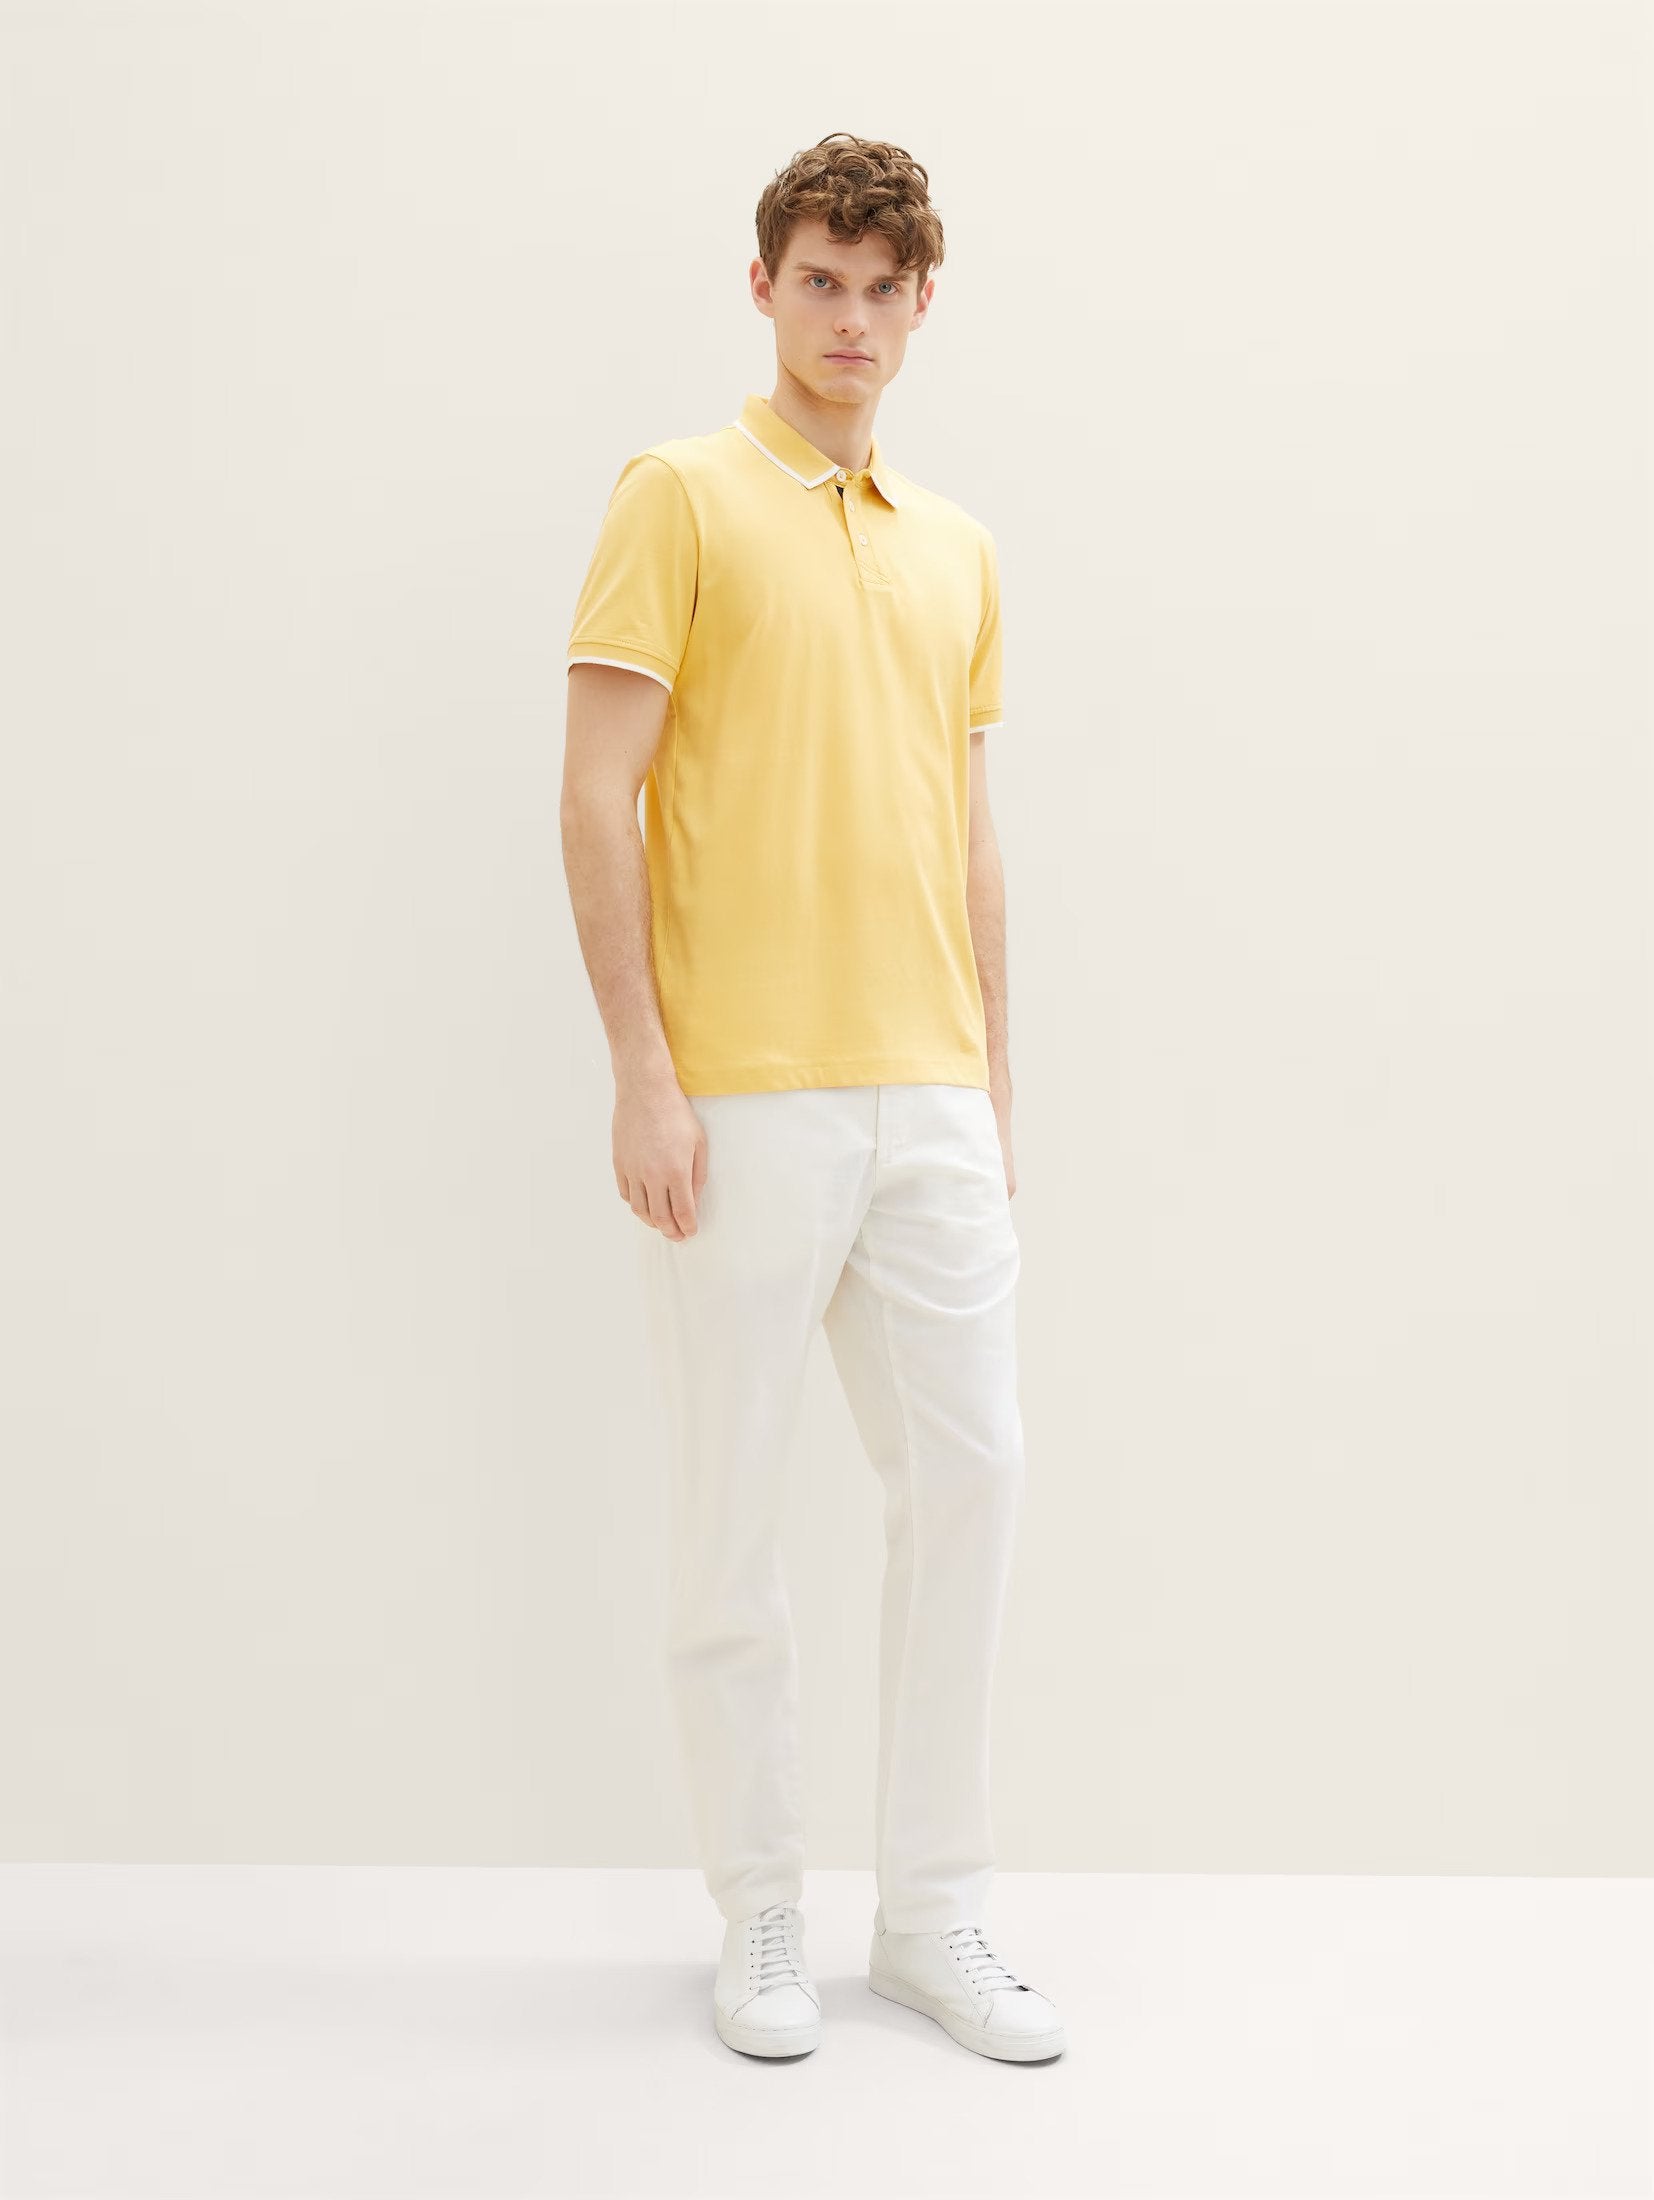 Tom Tailor Yellow Polo With White Designed Ends